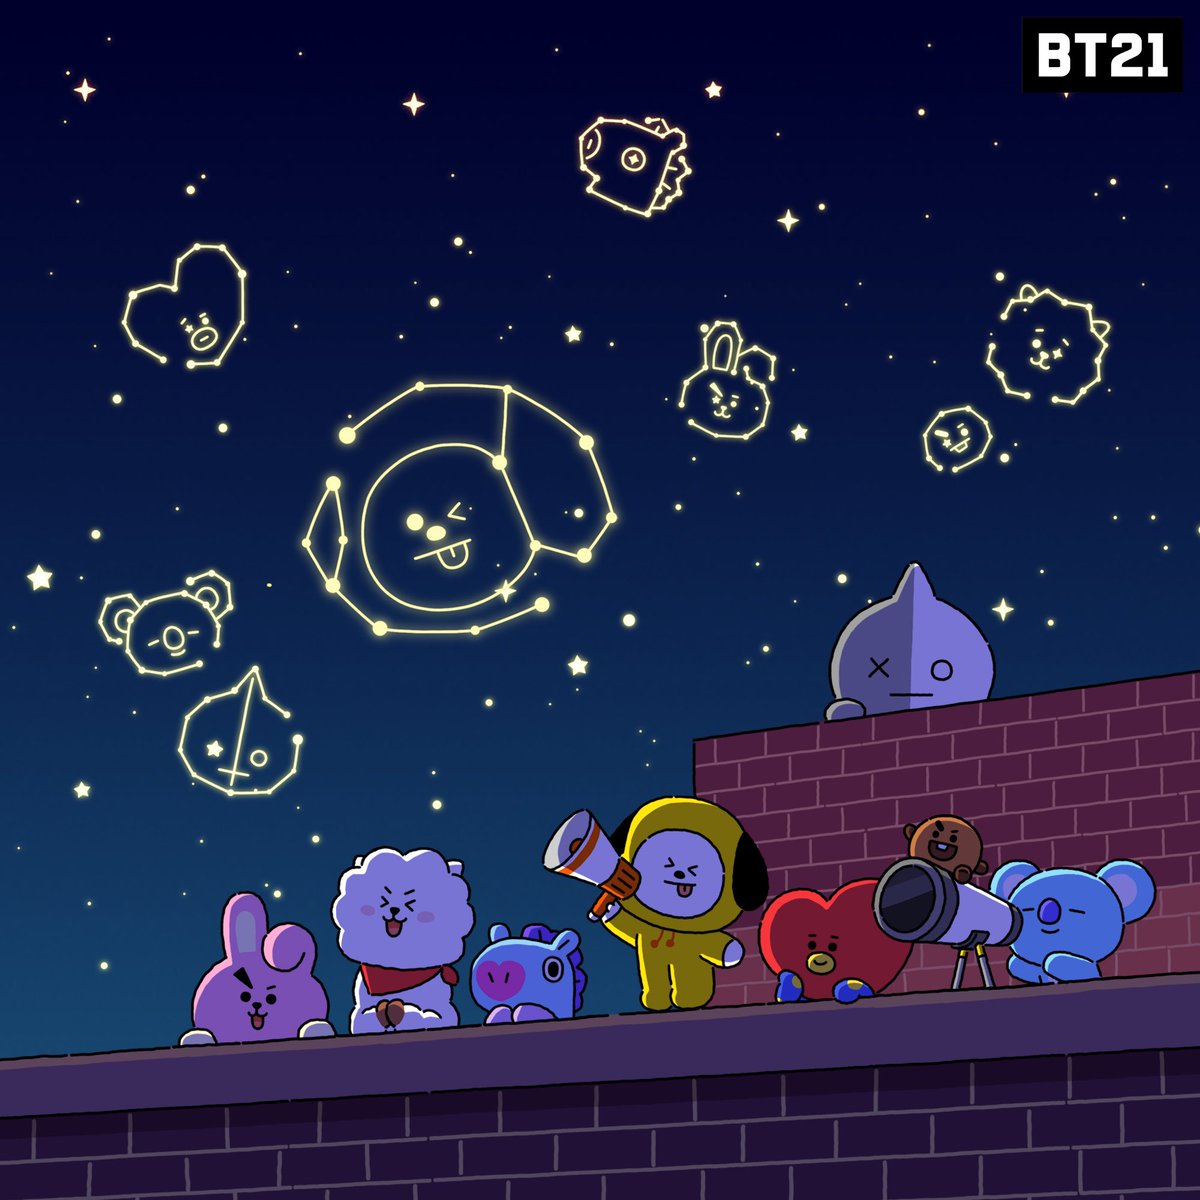 Look up! Dazzling BT21 UNIVER'STAR' in the night sky✨
UNISTARS, let’s go and see the stars tonight!💫🌌

#BT21 #NightSky #UNIVERSTAR #UNISTARS